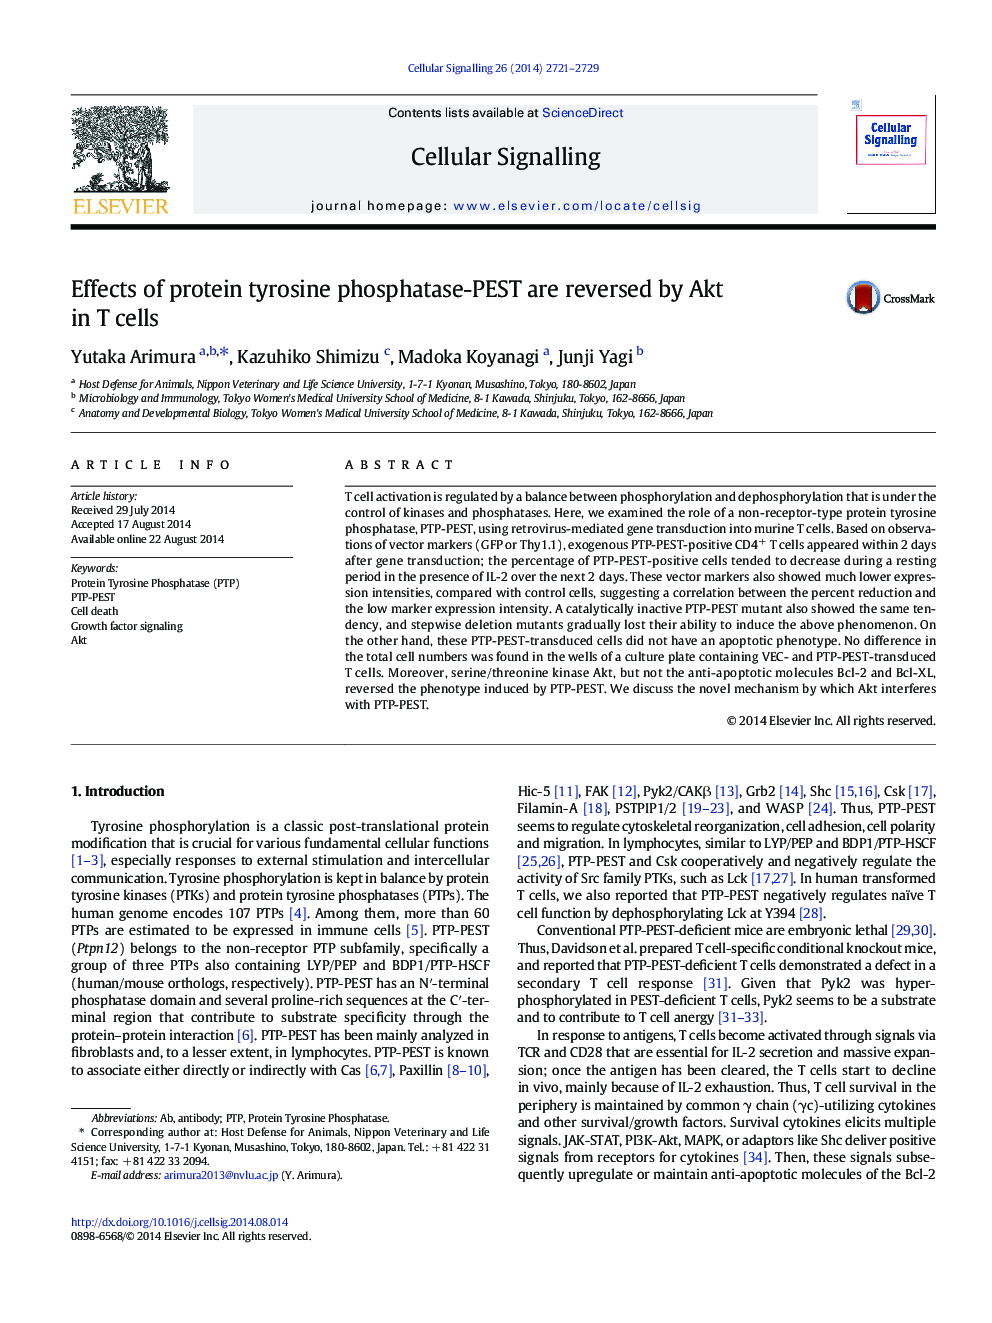 Effects of protein tyrosine phosphatase-PEST are reversed by Akt in T cells